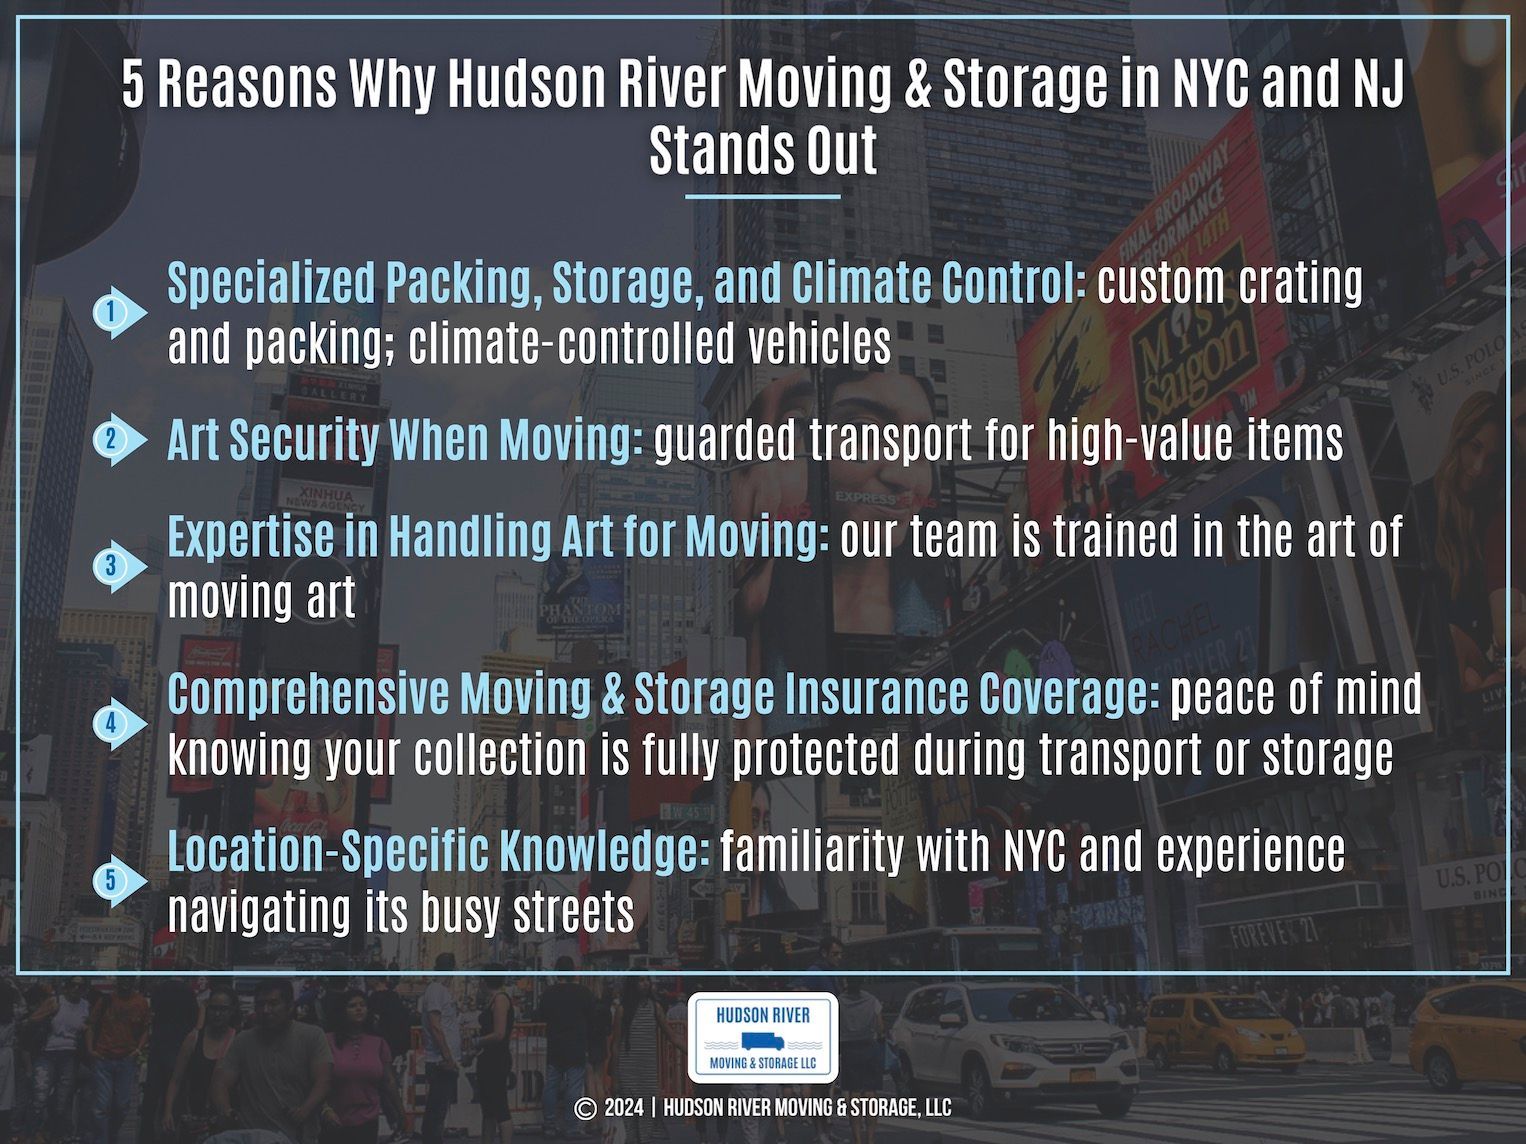 Text over a NYC street scene listing 5 reasons why Hudson River Moving & Storage stands out in New York City and NJ.